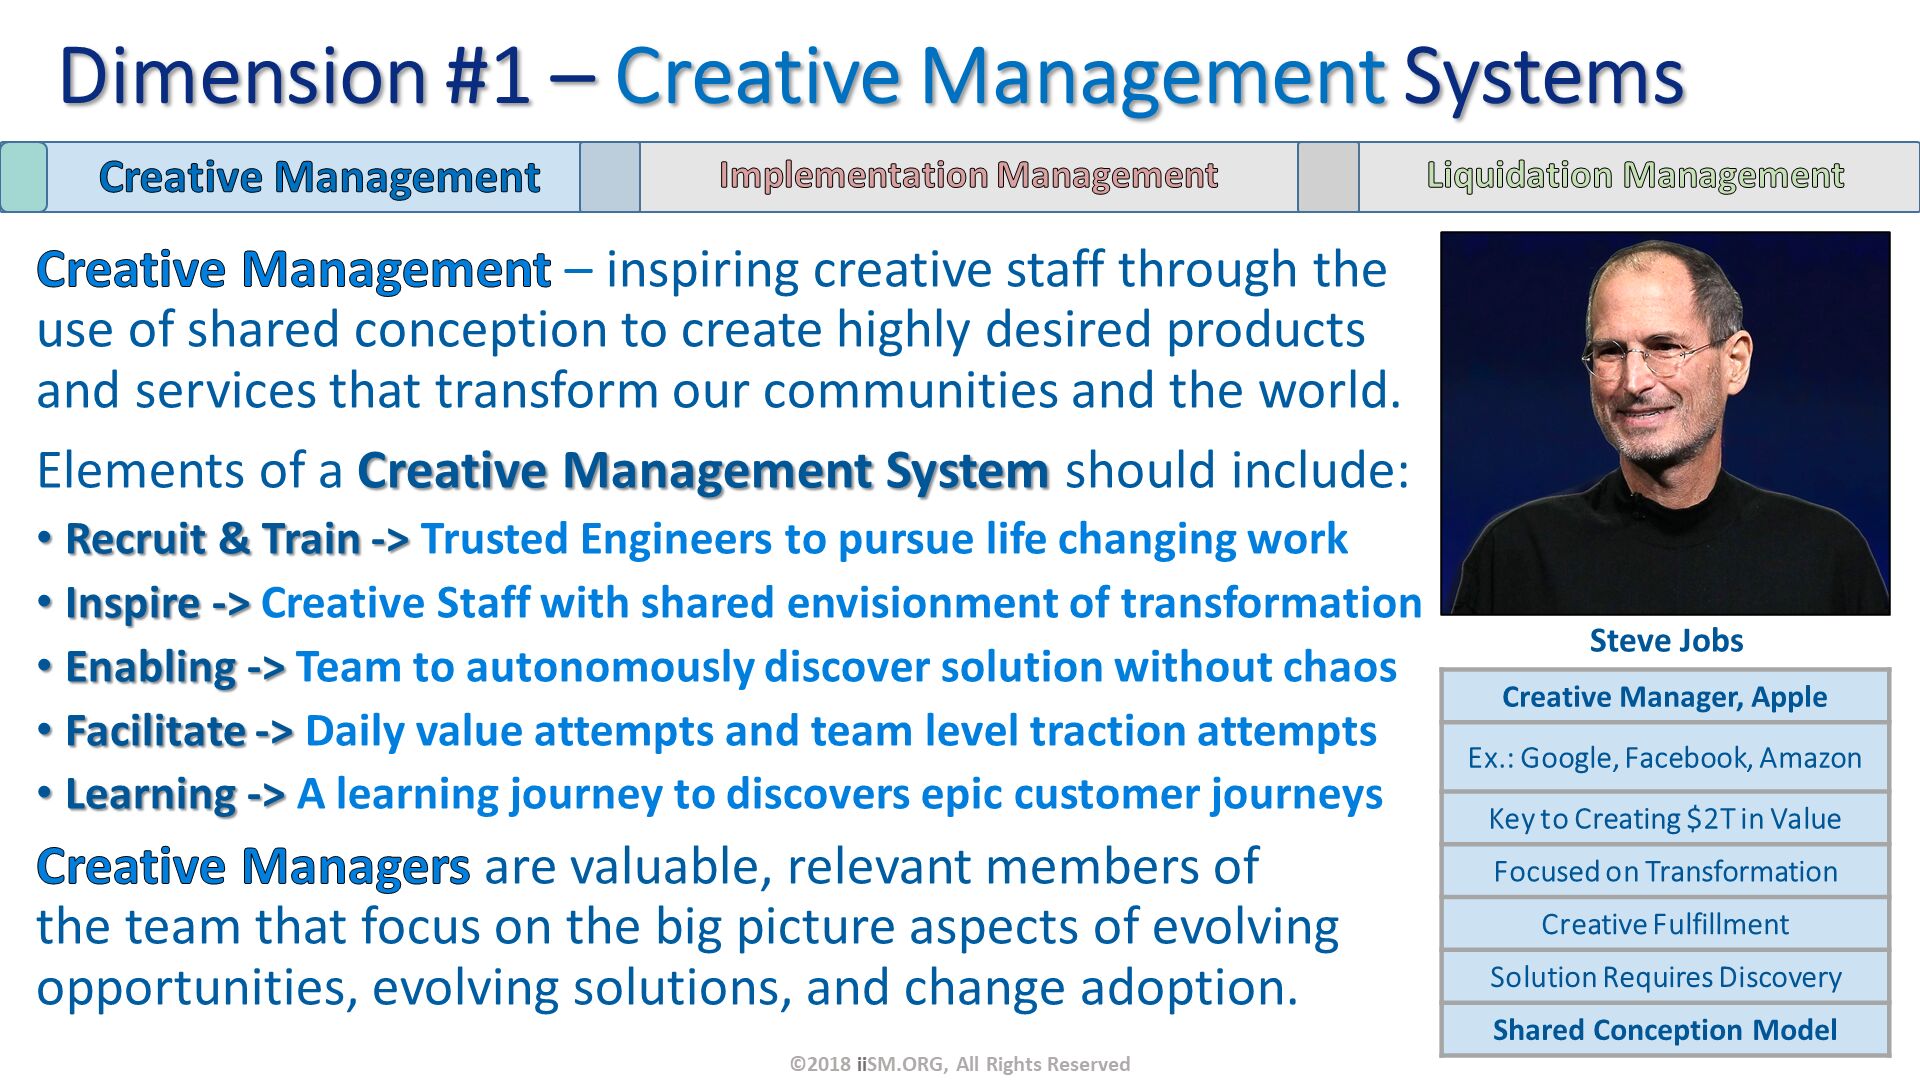 Creative Management – inspiring creative staff through the use of shared conception to create highly desired products and services that transform our communities and the world.
Elements of a Creative Management System should include:
Recruit & Train -> Trusted Engineers to pursue life changing work
Inspire -> Creative Staff with shared envisionment of transformation
Enabling -> Team to autonomously discover solution without chaos
Facilitate -> Daily value attempts and team level traction attempts
Learning -> A learning journey to discovers epic customer journeys
Creative Managers are valuable, relevant members of the team that focus on the big picture aspects of evolving opportunities, evolving solutions, and change adoption. Dimension #1 – Creative Management Systems. Steve Jobs. ©2018 iiSM.ORG, All Rights Reserved. 